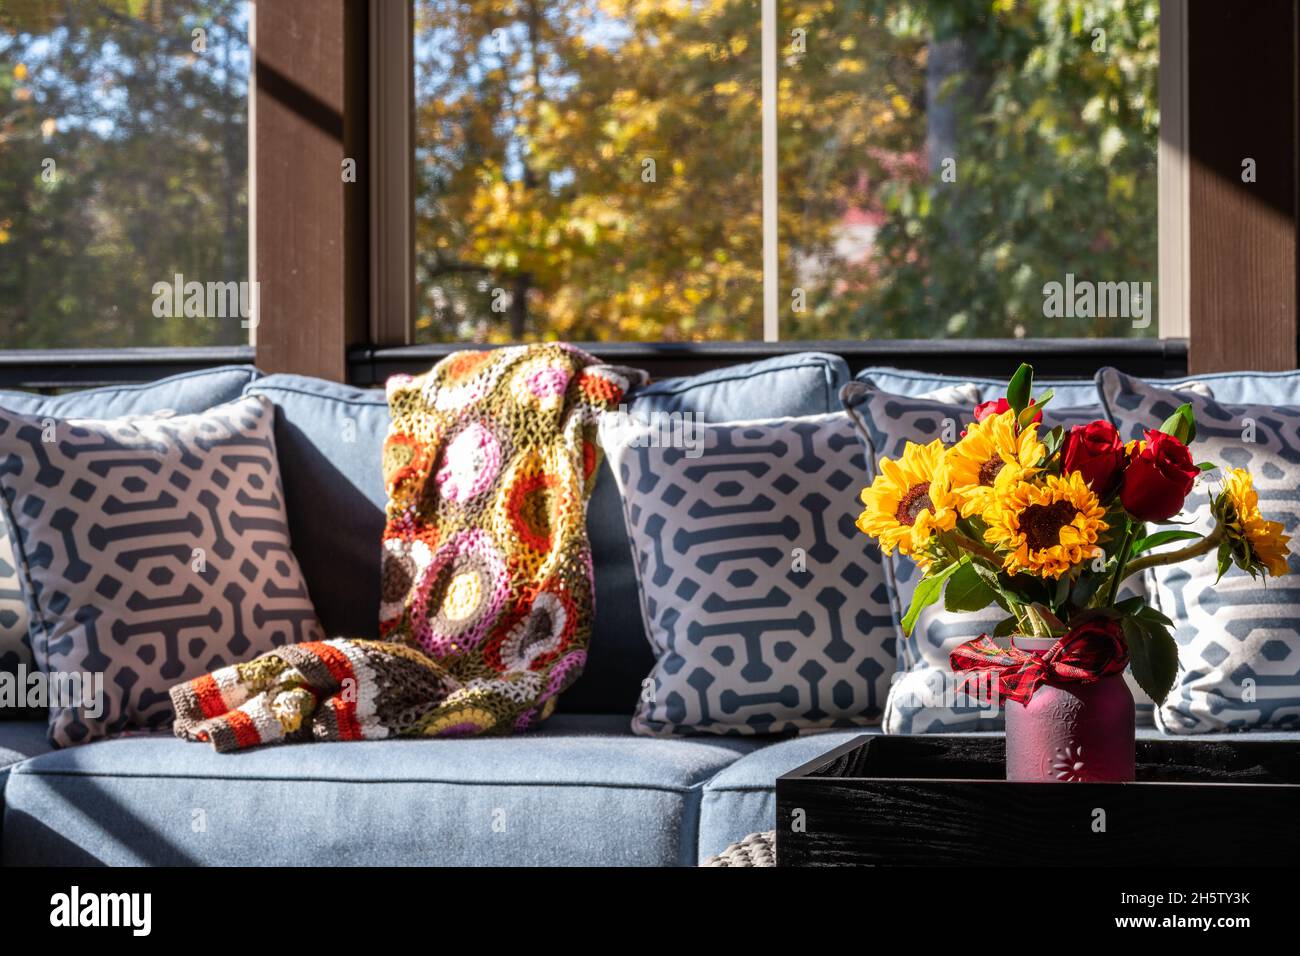 Cozy patio corner in a screened porch with flower bouquet in a vase, autumn leaves and woods in the background. Stock Photo